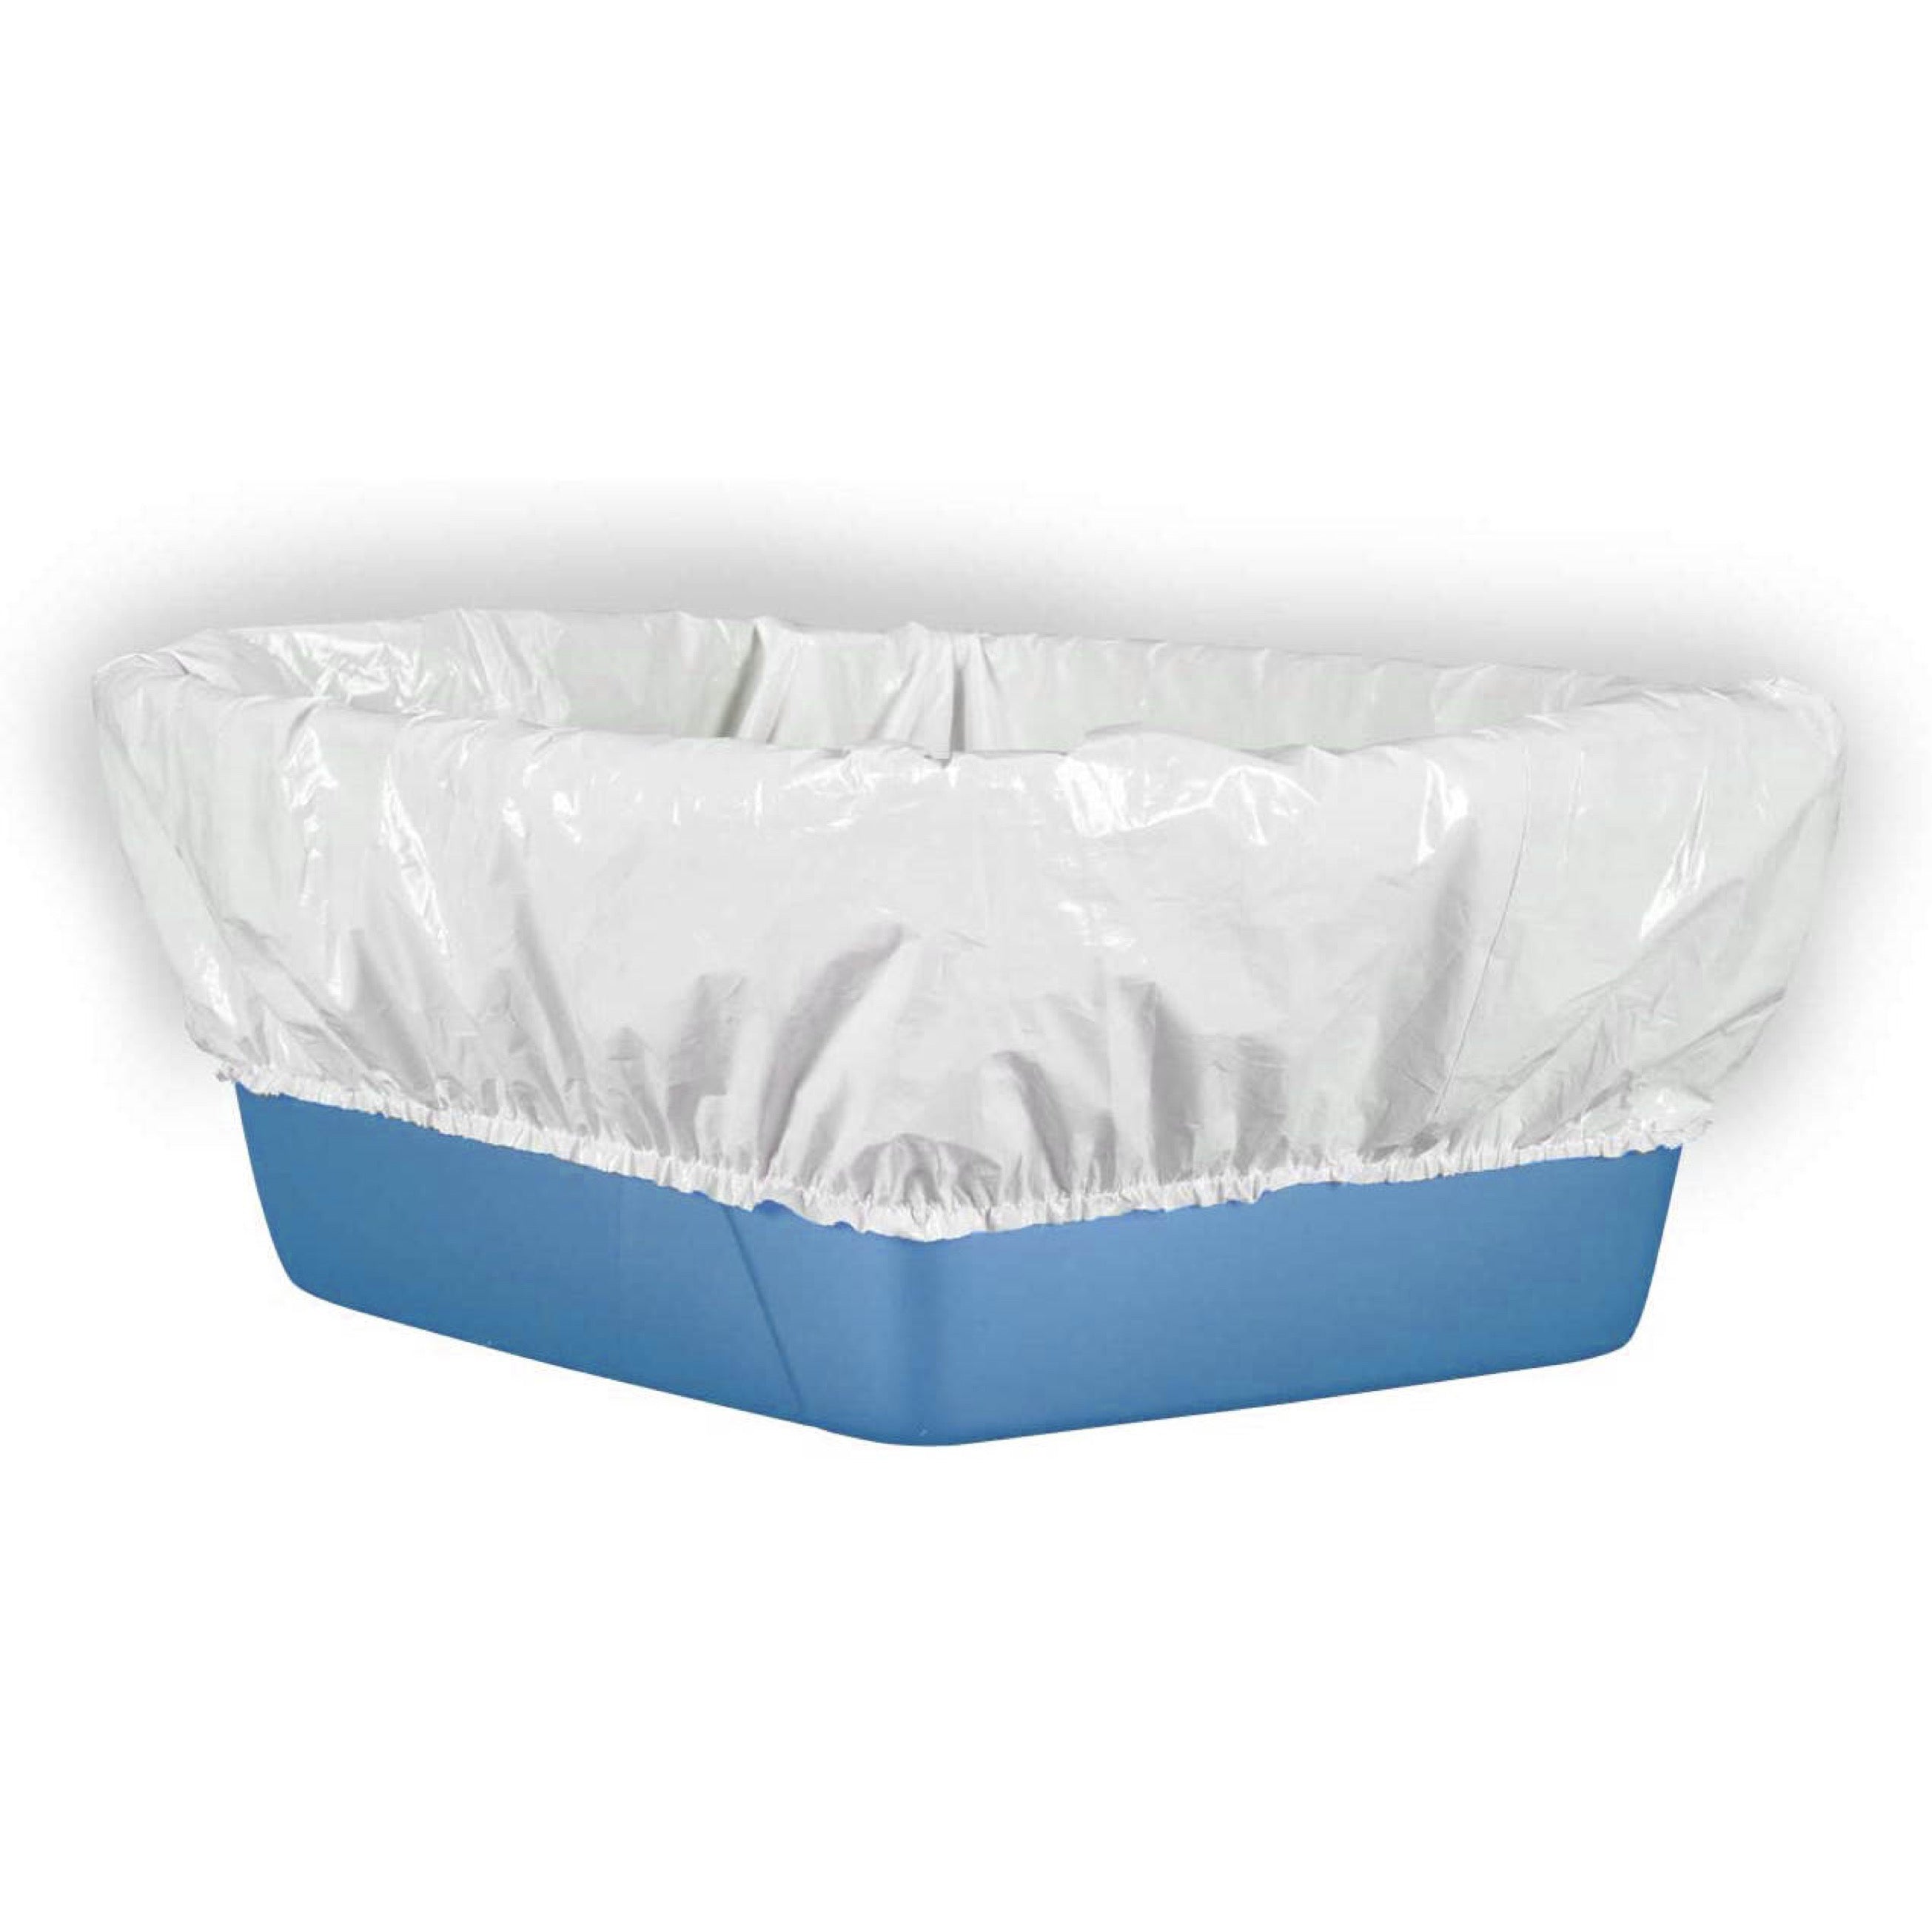 Buy PETOCAT Cat Litter Liners Heavy Duty Giant Sifting Cat Pan Liners  Jumbo Drawstring ExtraThick Kitty Litter Box Bag XLarge 15 Liners  Online at Low Prices in India  Amazonin